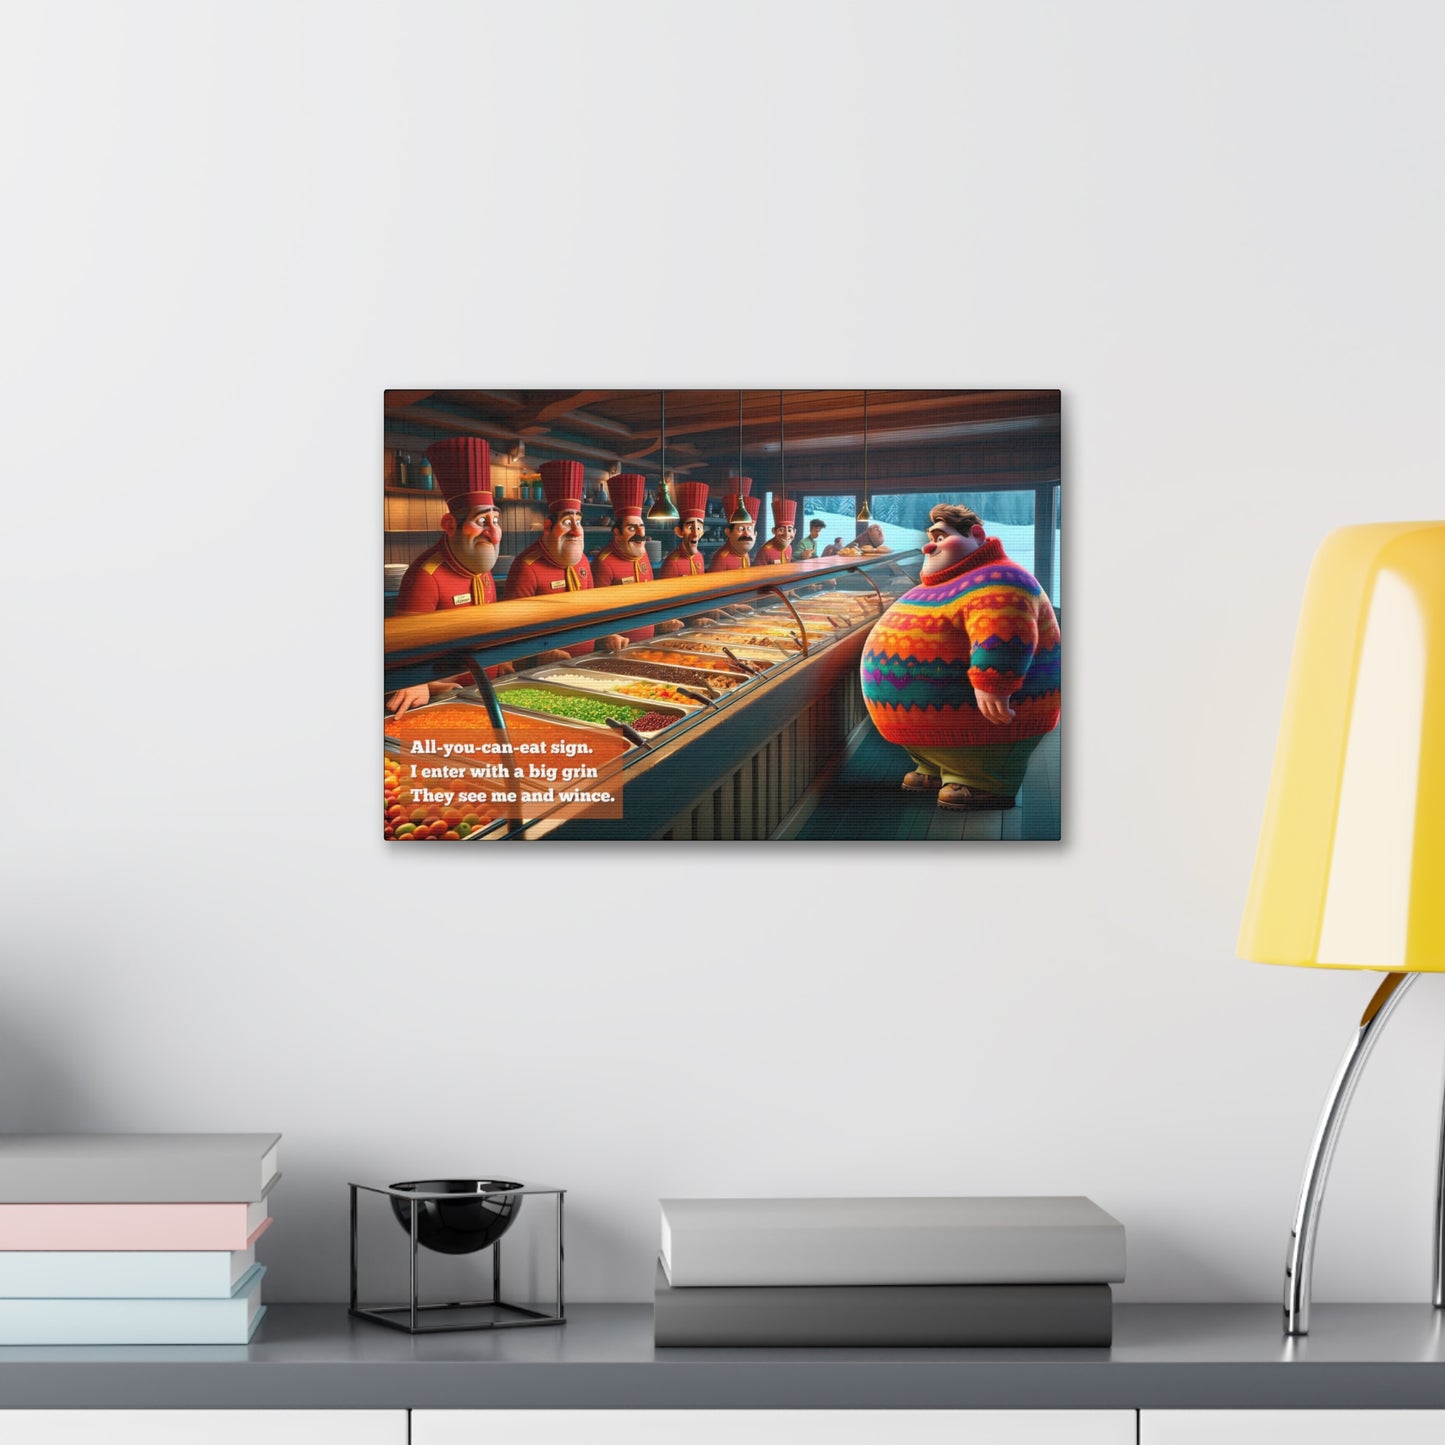 Challenge Accepted: Playful Scene of All-You-Can-Eat Canvas Wall Art with Silly Haiku | HAI-013c